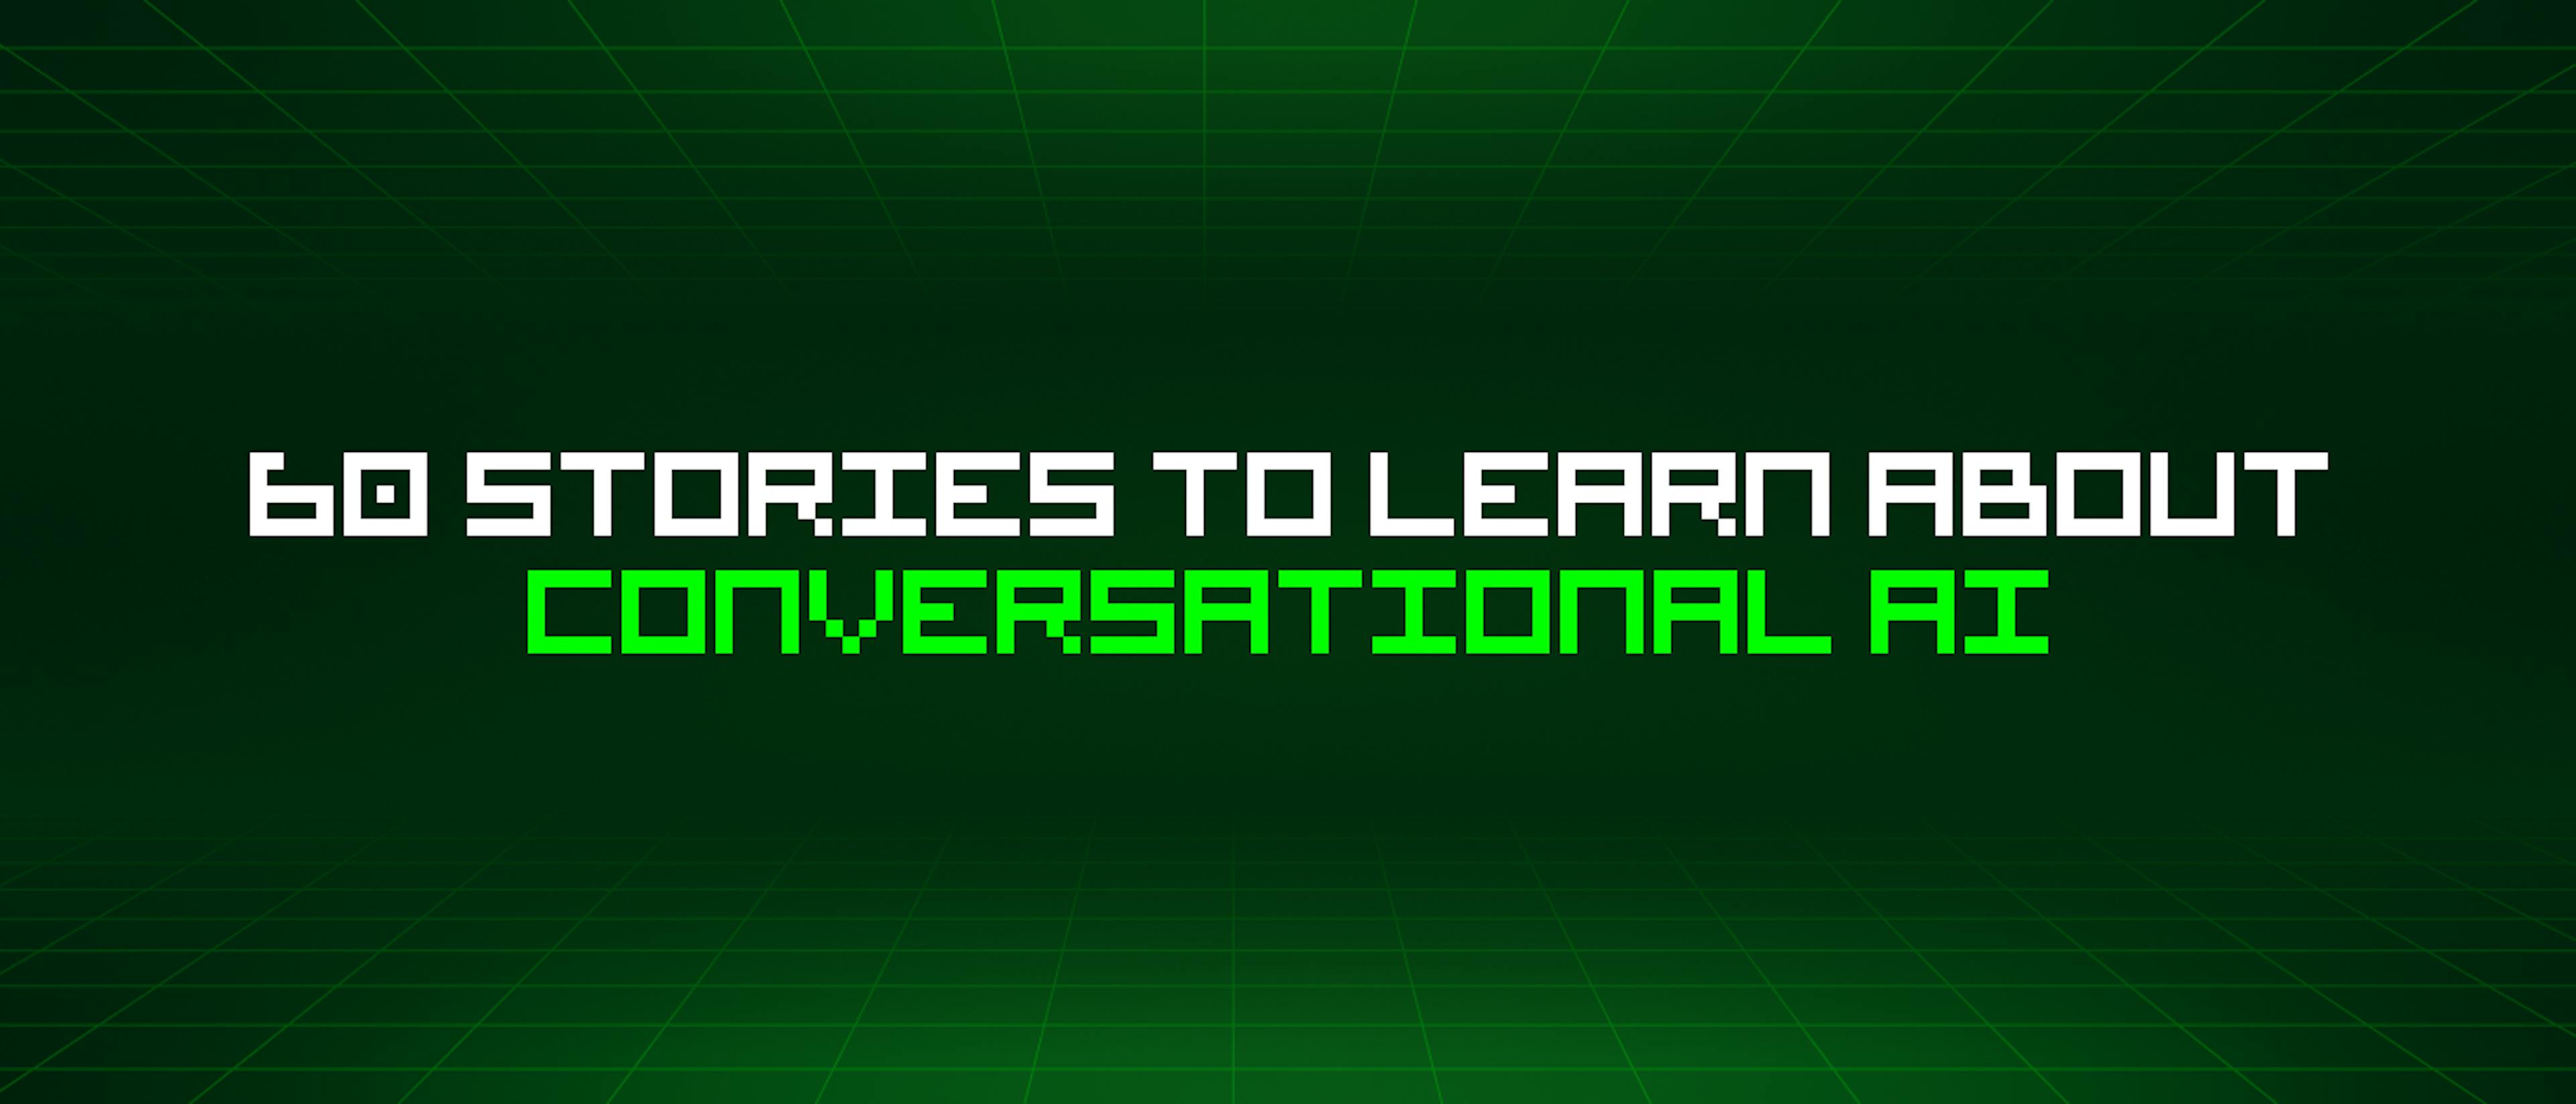 featured image - 60 Stories To Learn About Conversational Ai